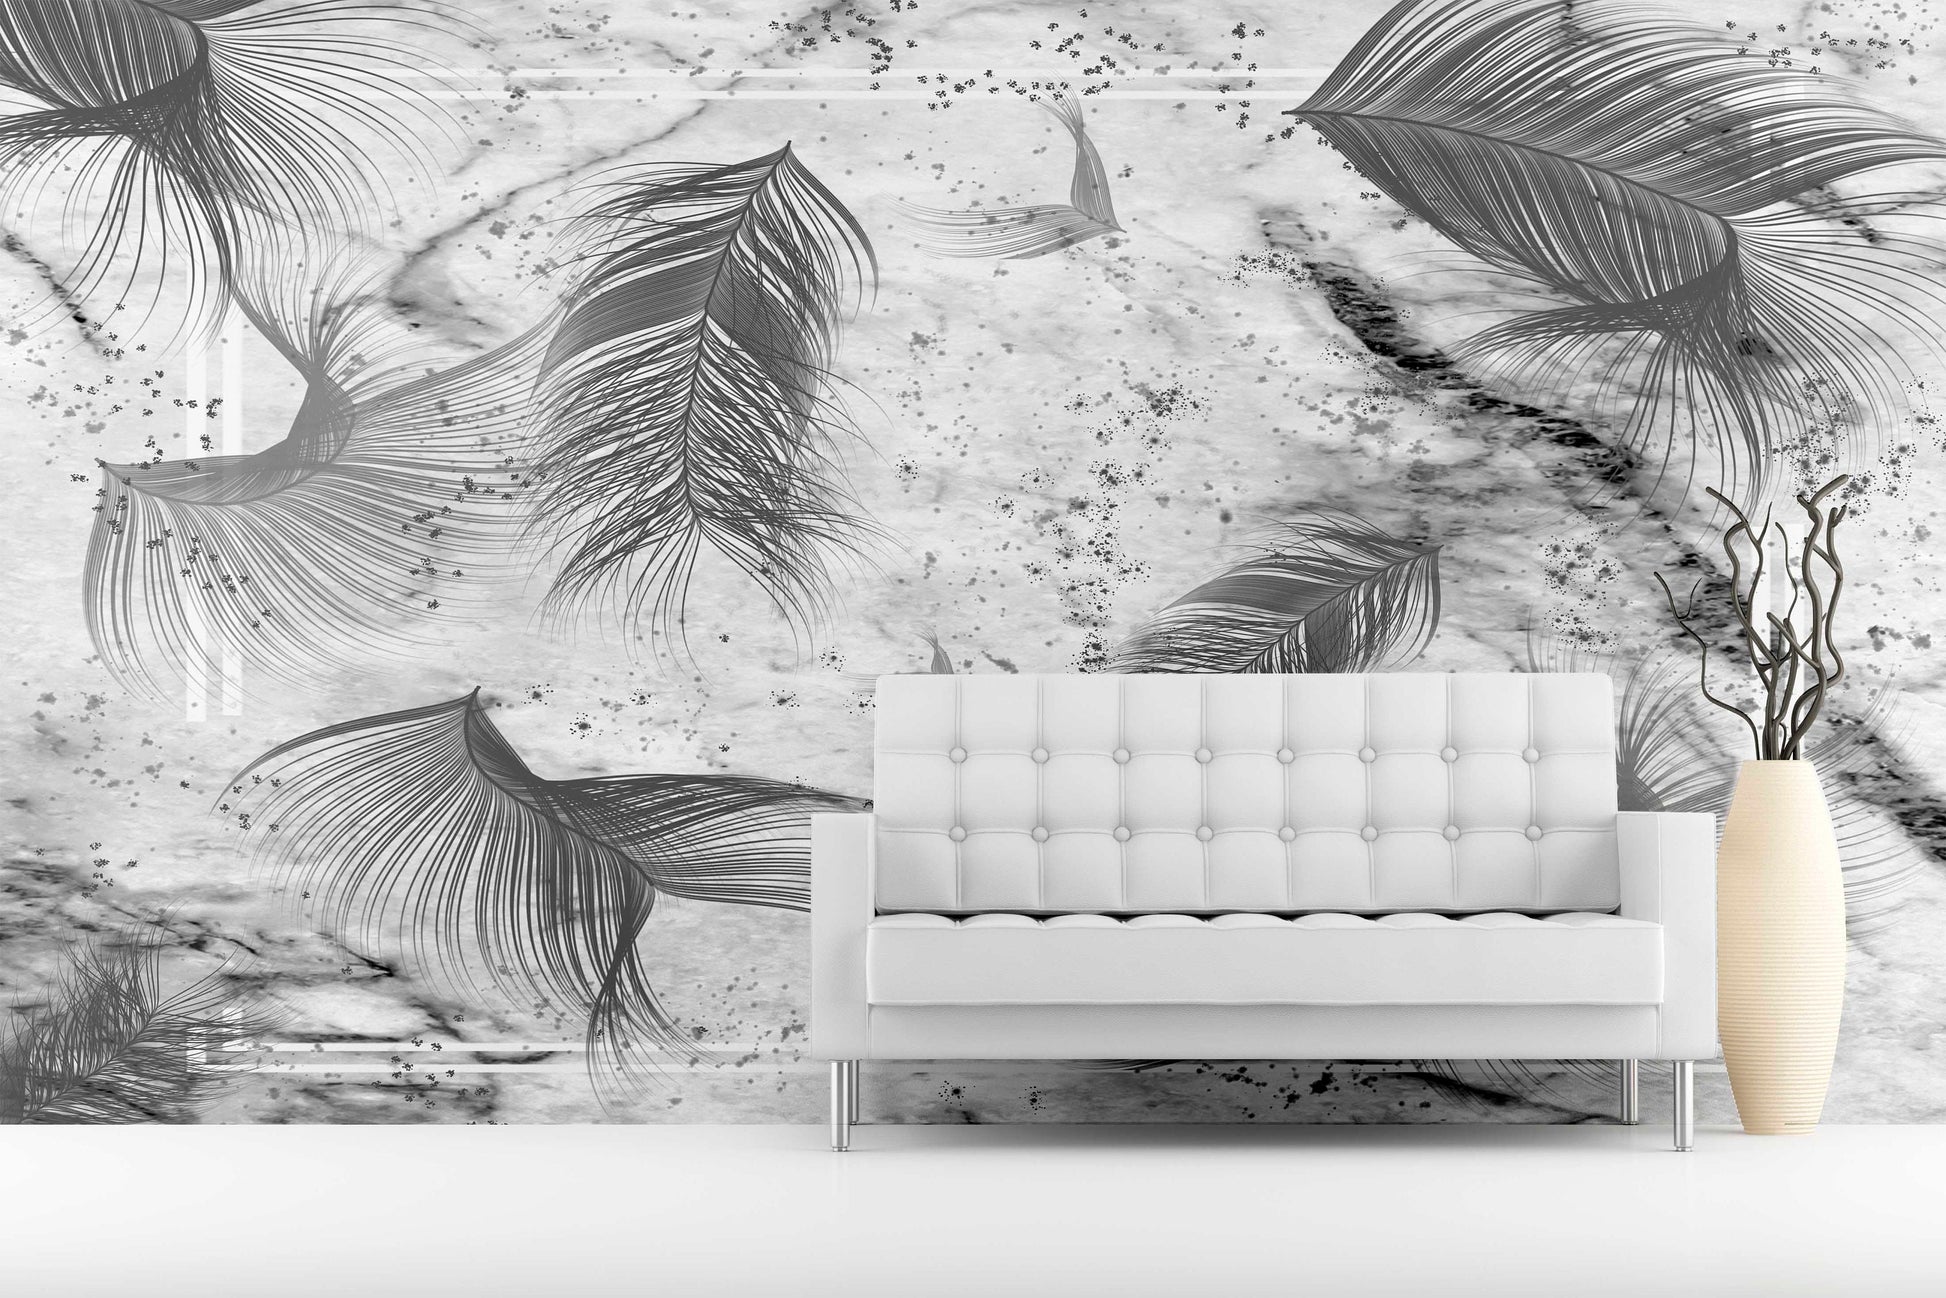 Abstract peel and stick wallpaper, self adhesive marble wall nural, large feathers wallcovering, removable black white canvas wallpaper